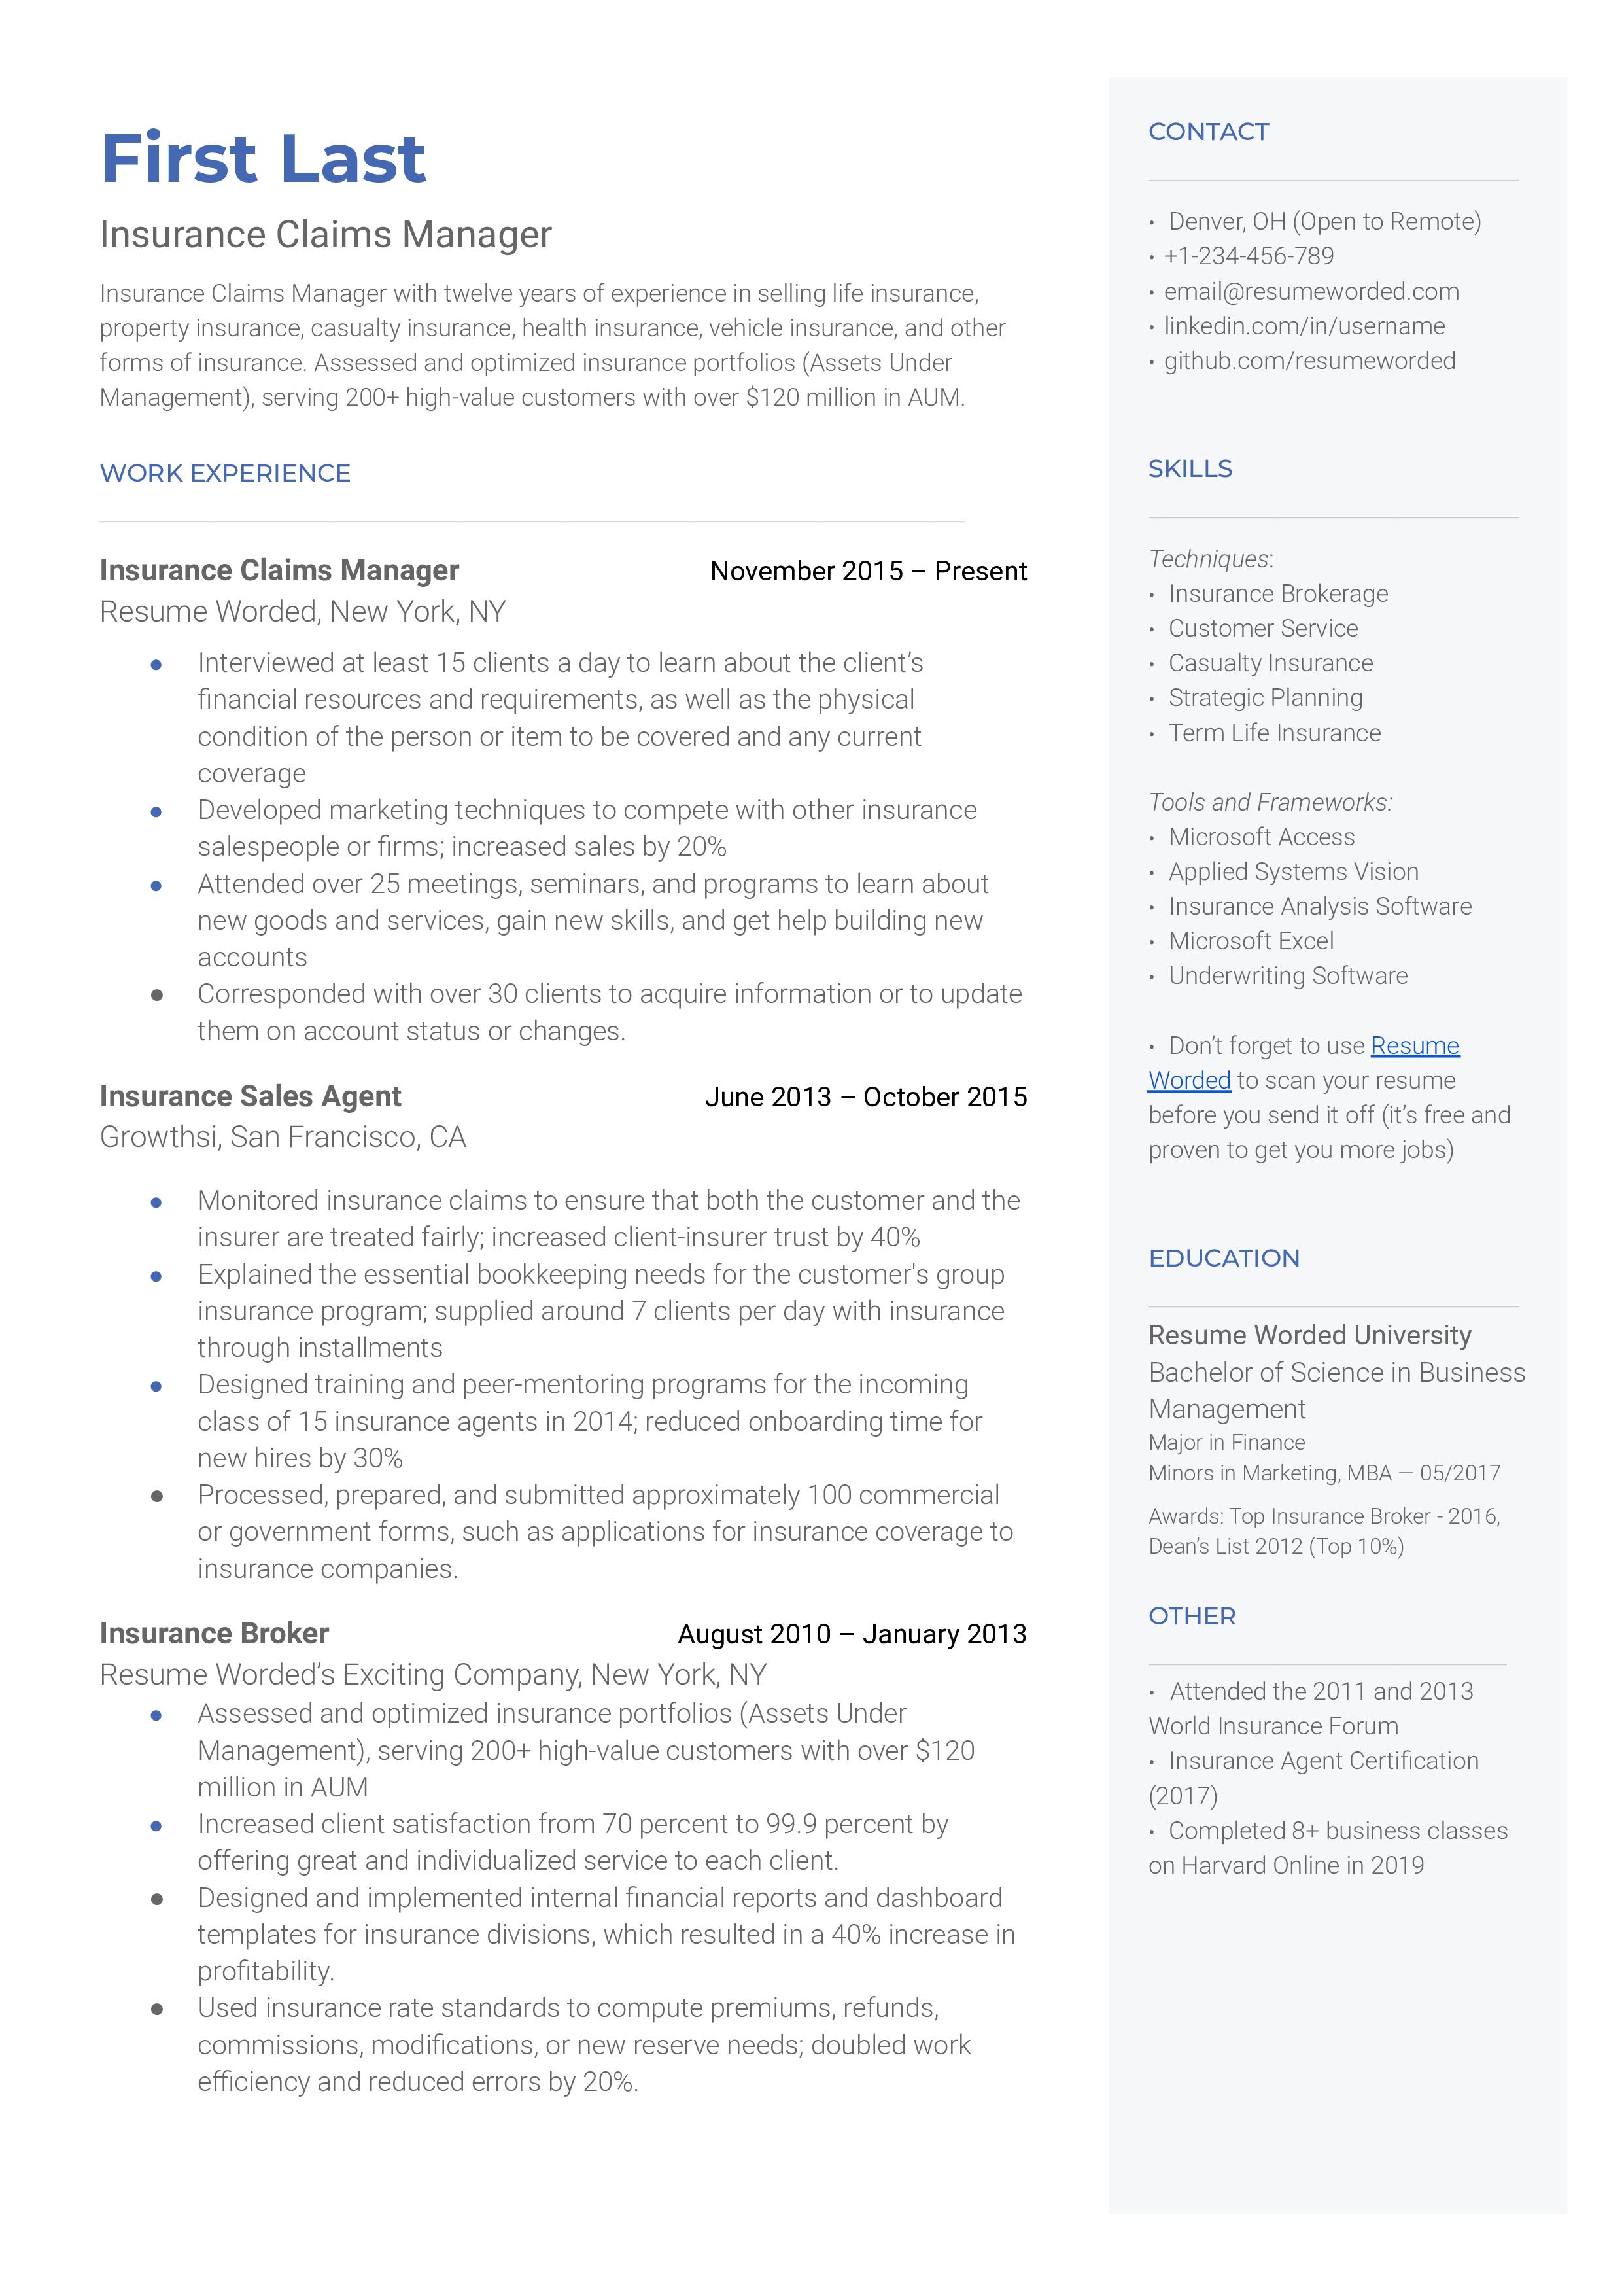 Insurance Claims Manager Resume Sample